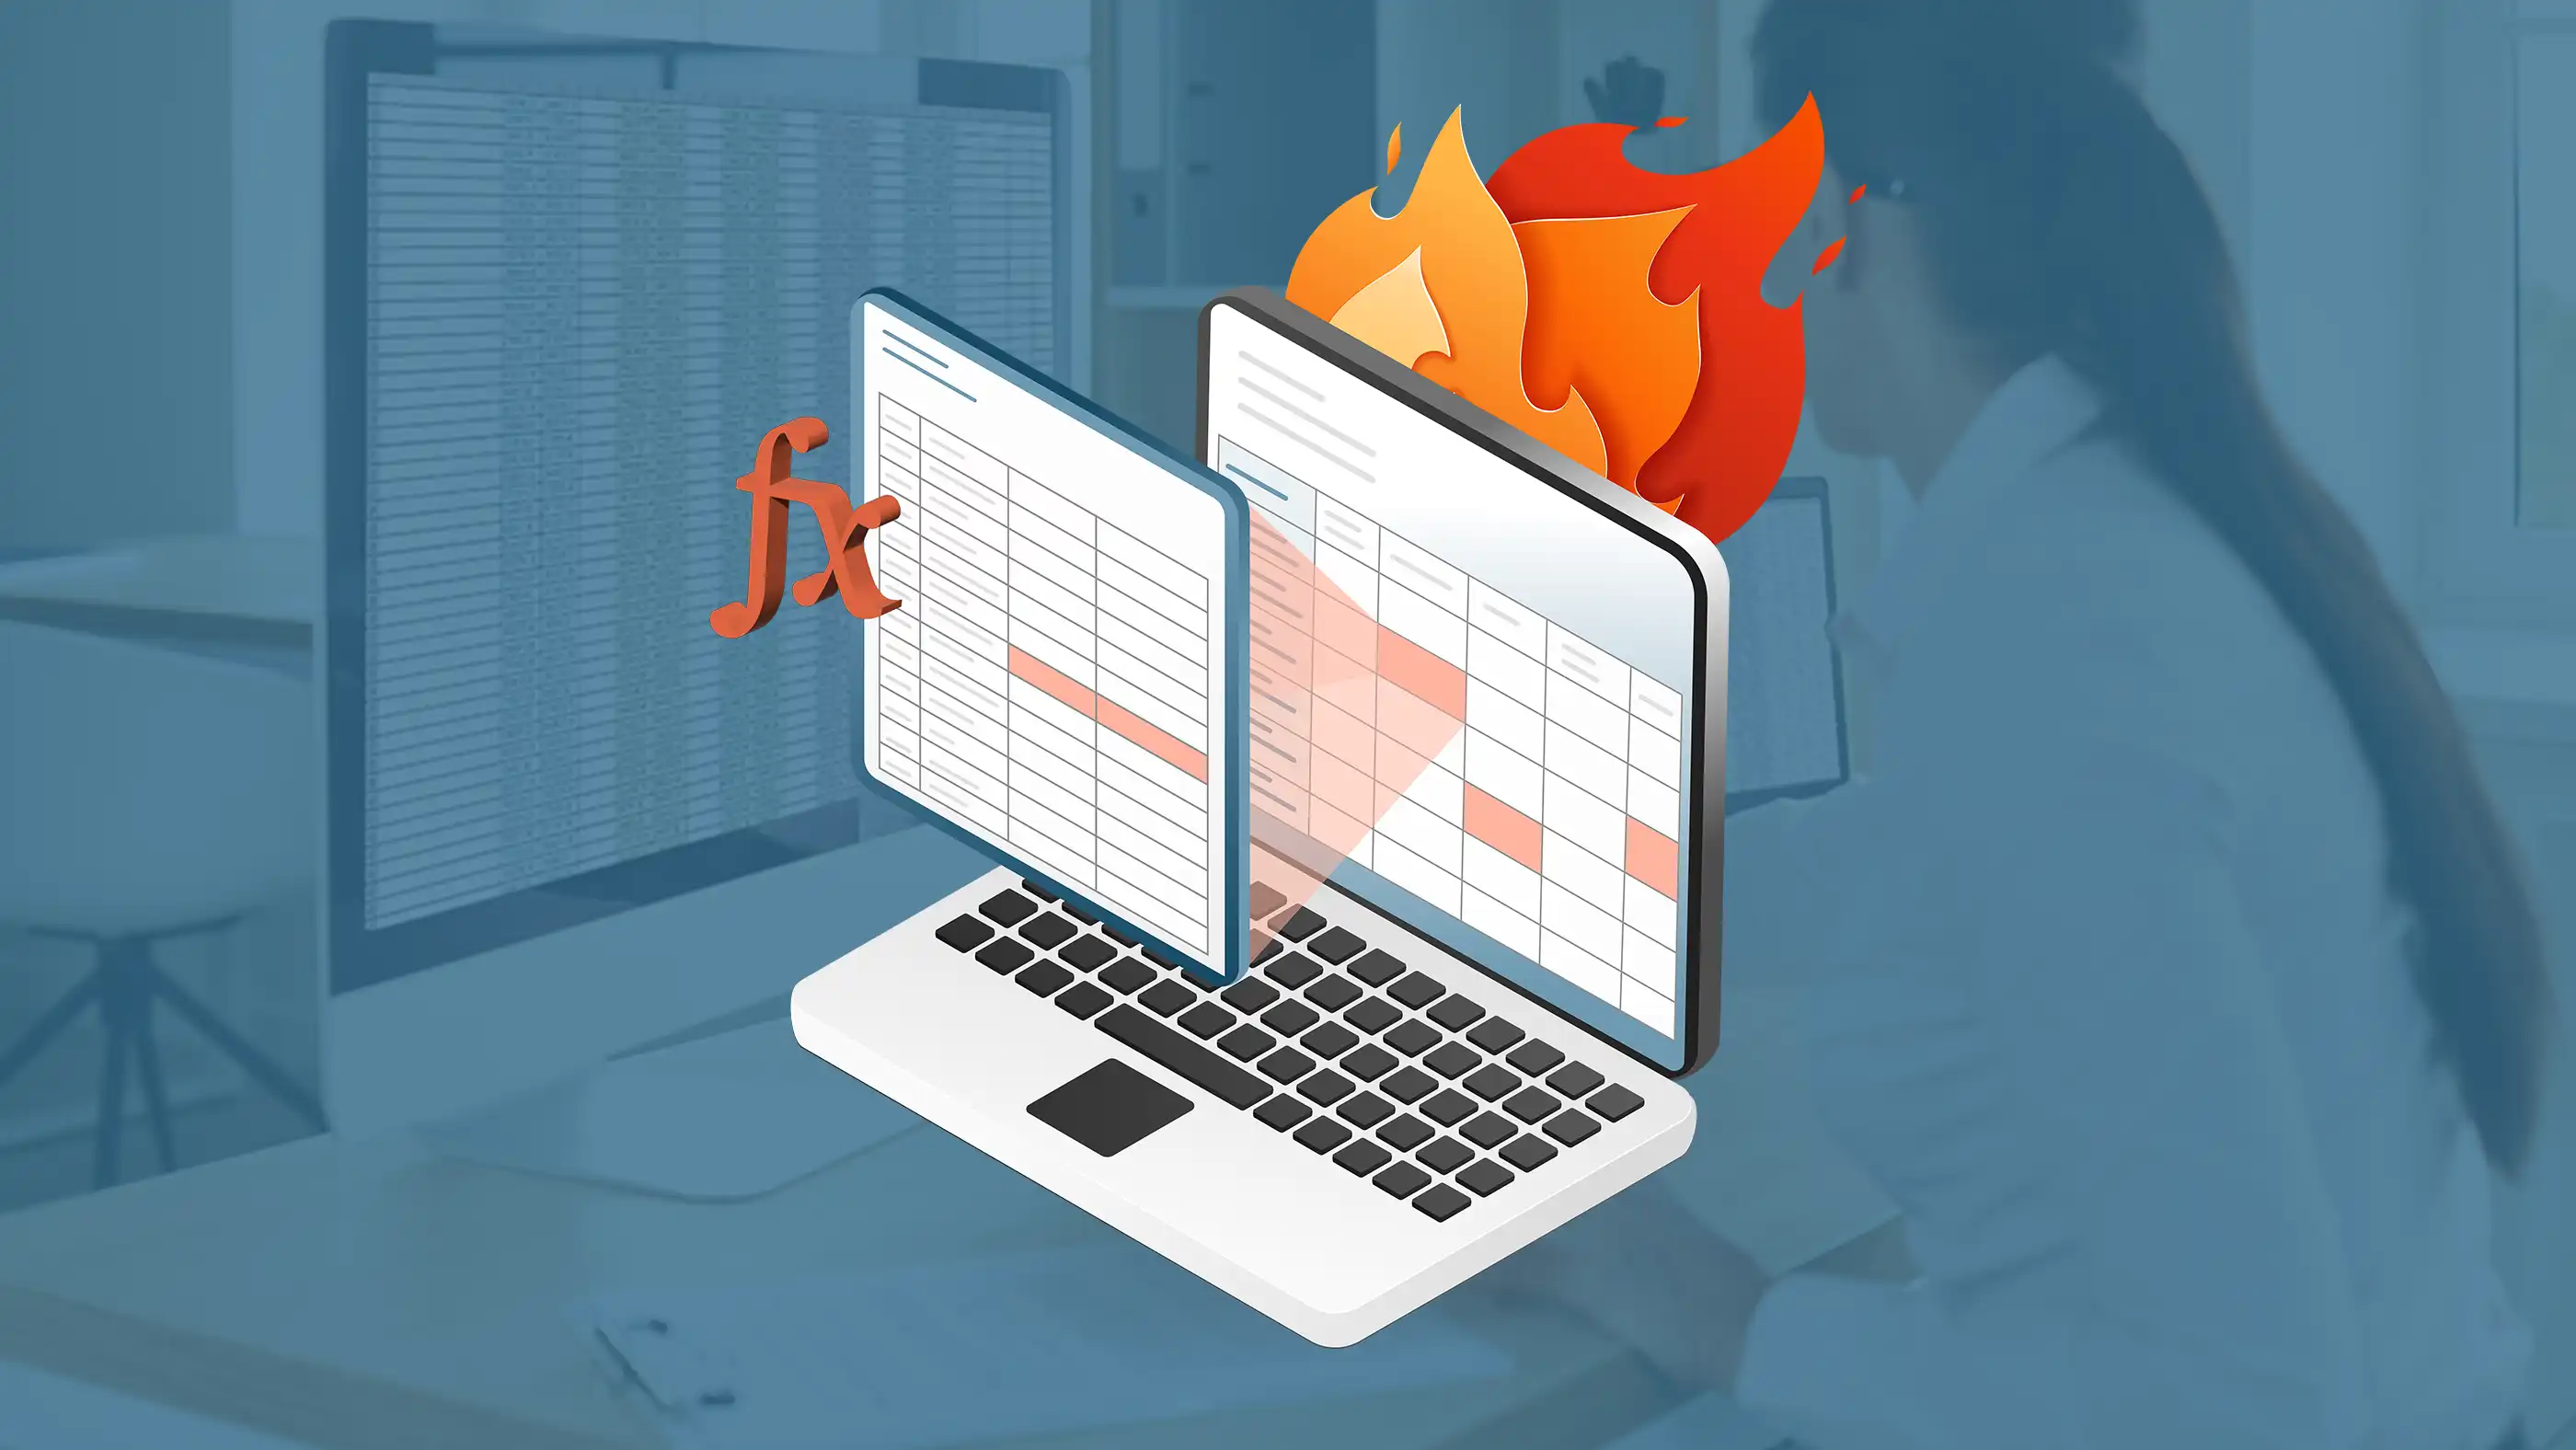 A 3D graphic of a laptop with a spreadsheet open on the screen and a function icon floating in front of the screen. The laptop is on fire.